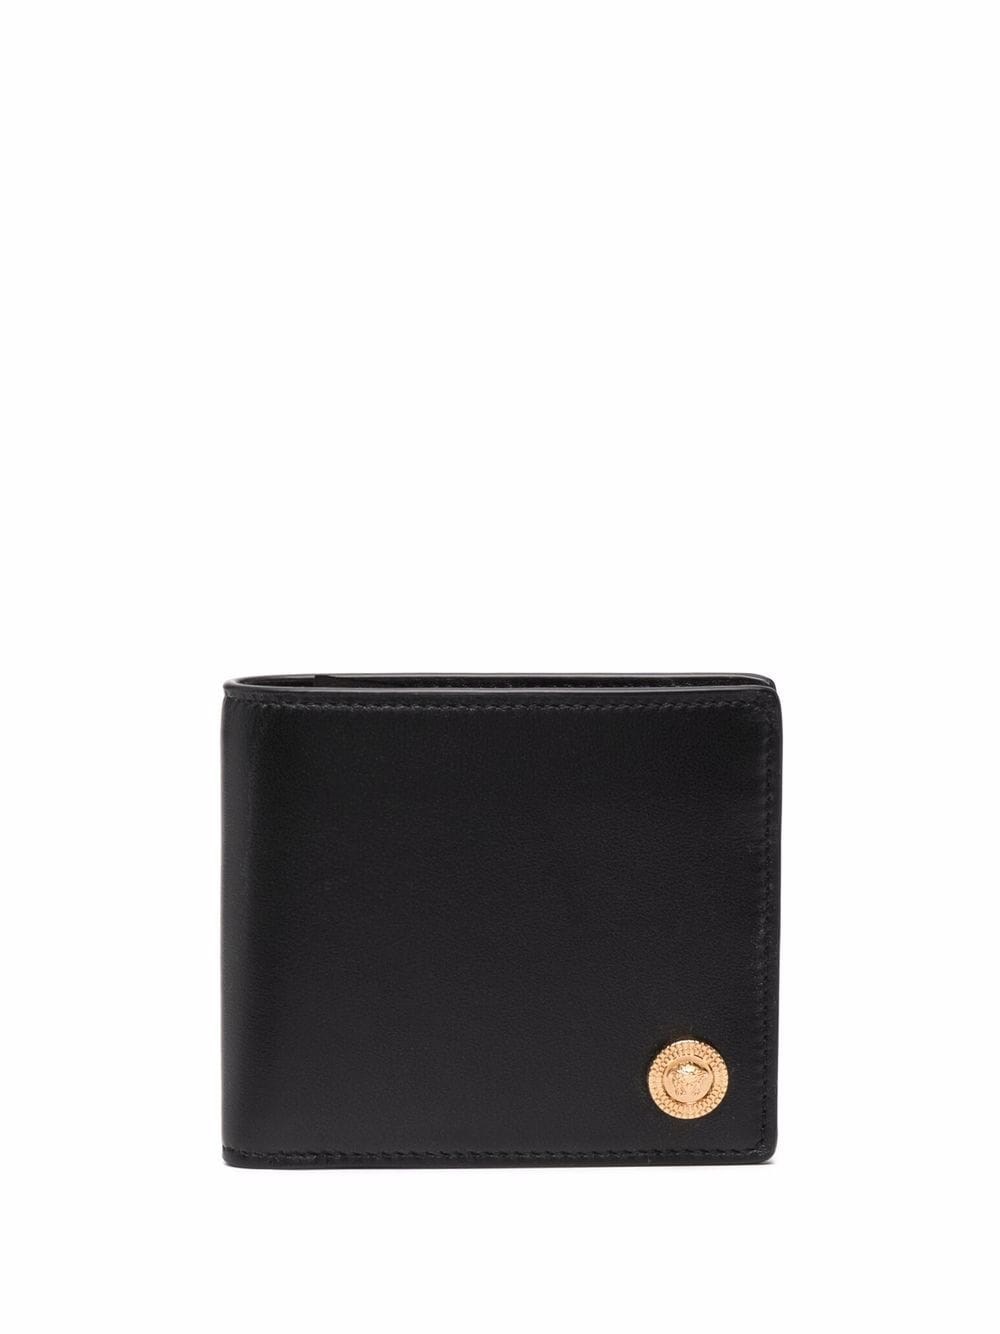 Men's VERSACE Wallets On Sale, Up To 70% Off | ModeSens